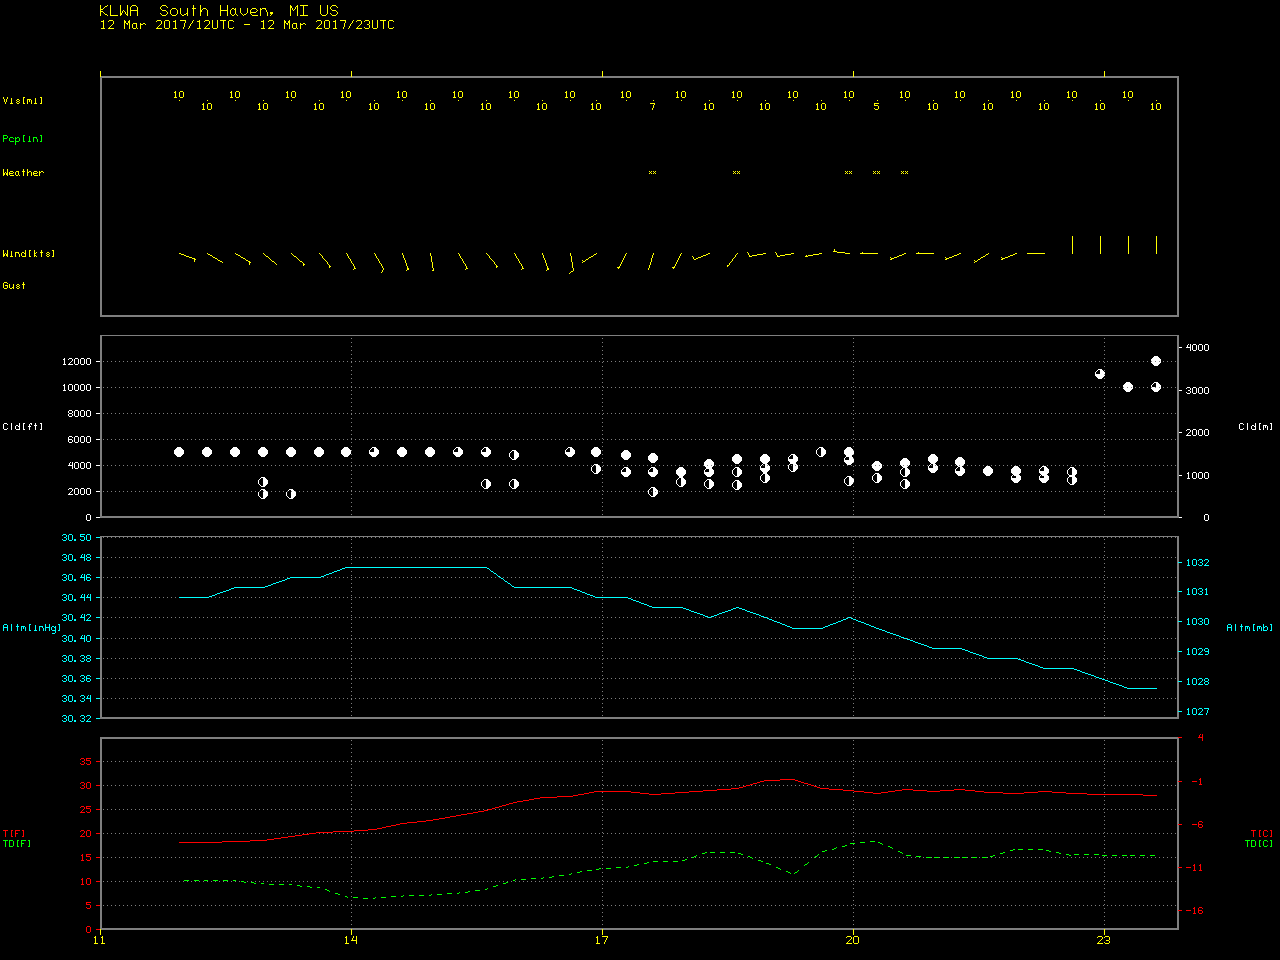 Time series plot of South Haven, Michigan surface observations [click to enlarge]